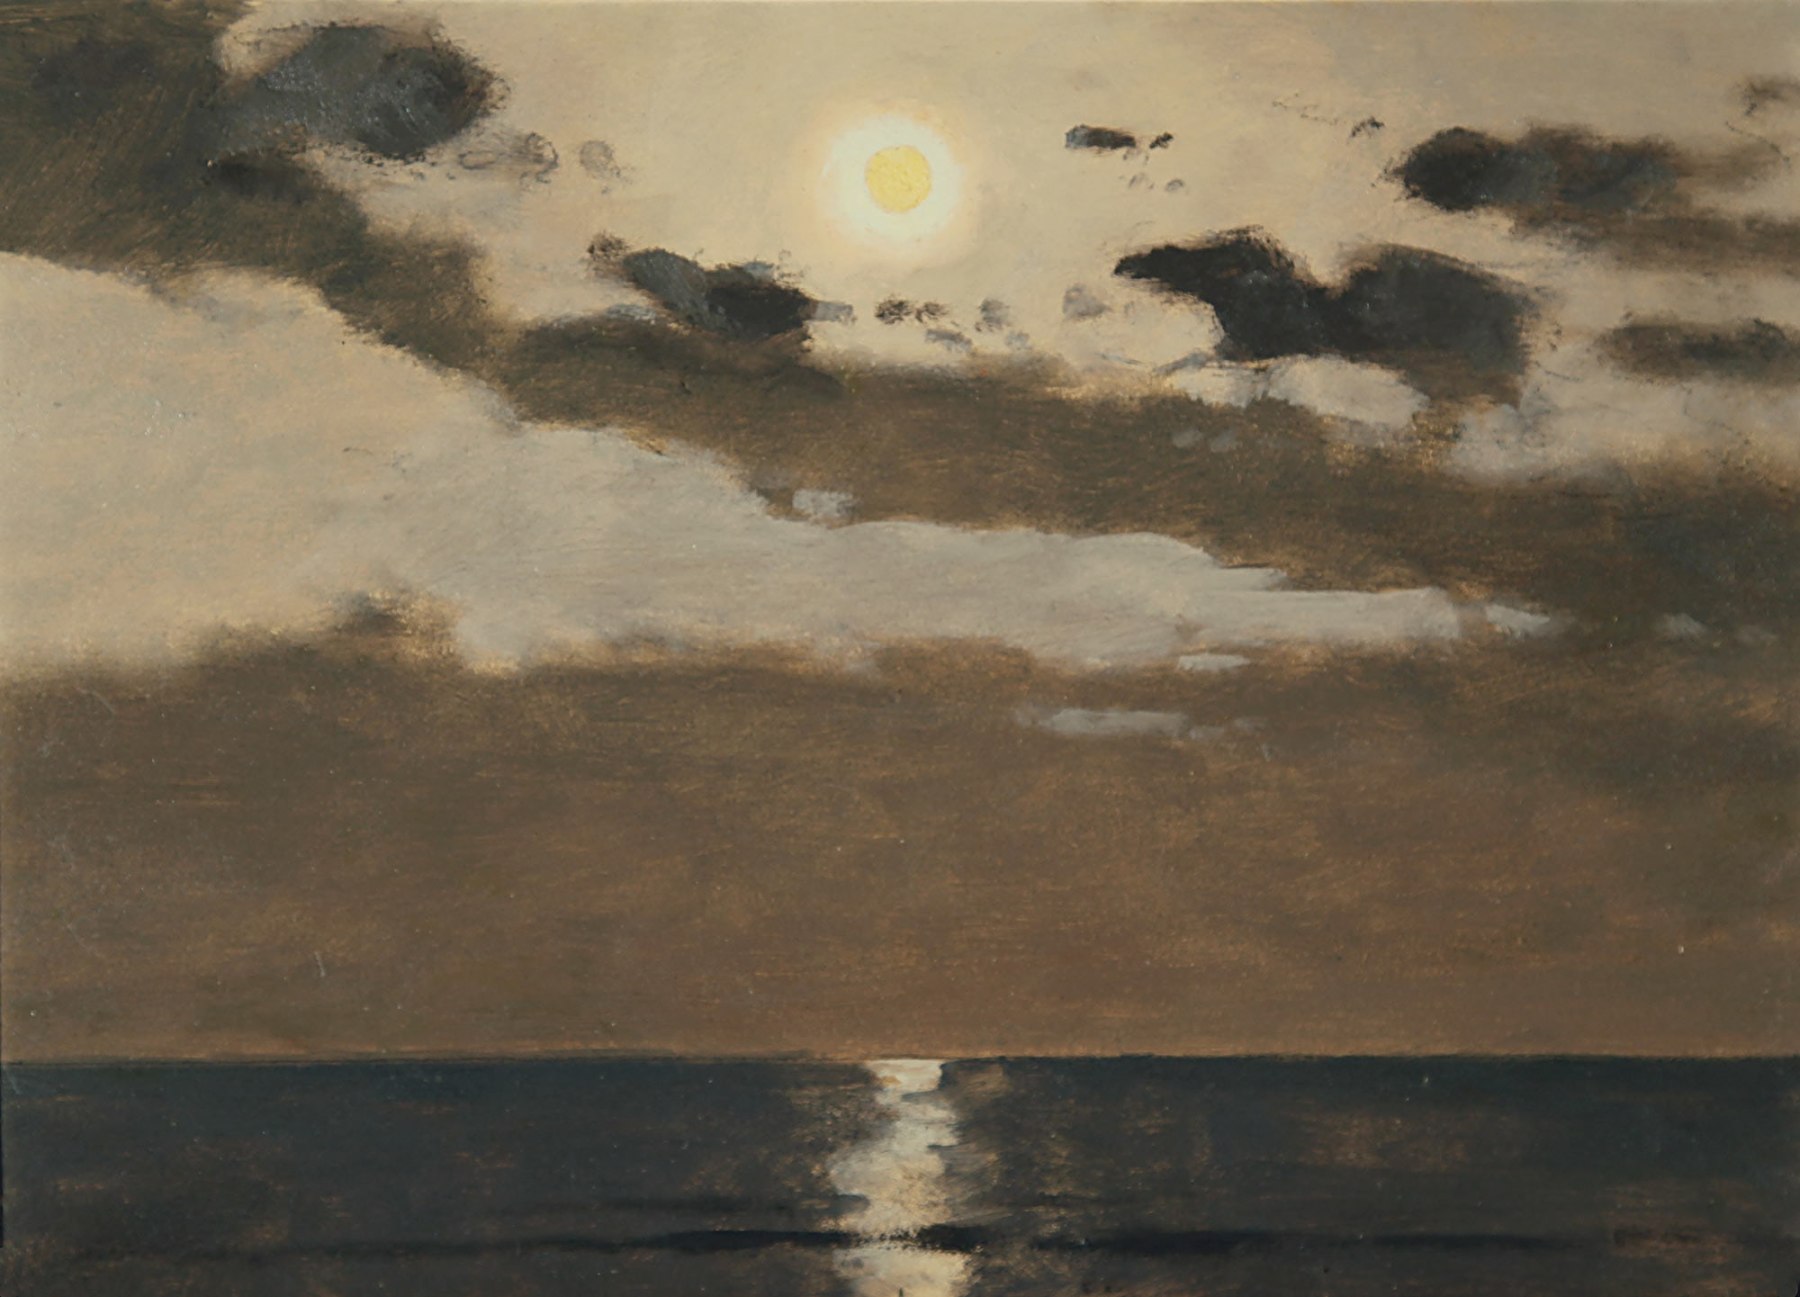 LOCKWOOD DE FOREST (1850-1932), Sublime Moonlight from the Shore, 1918